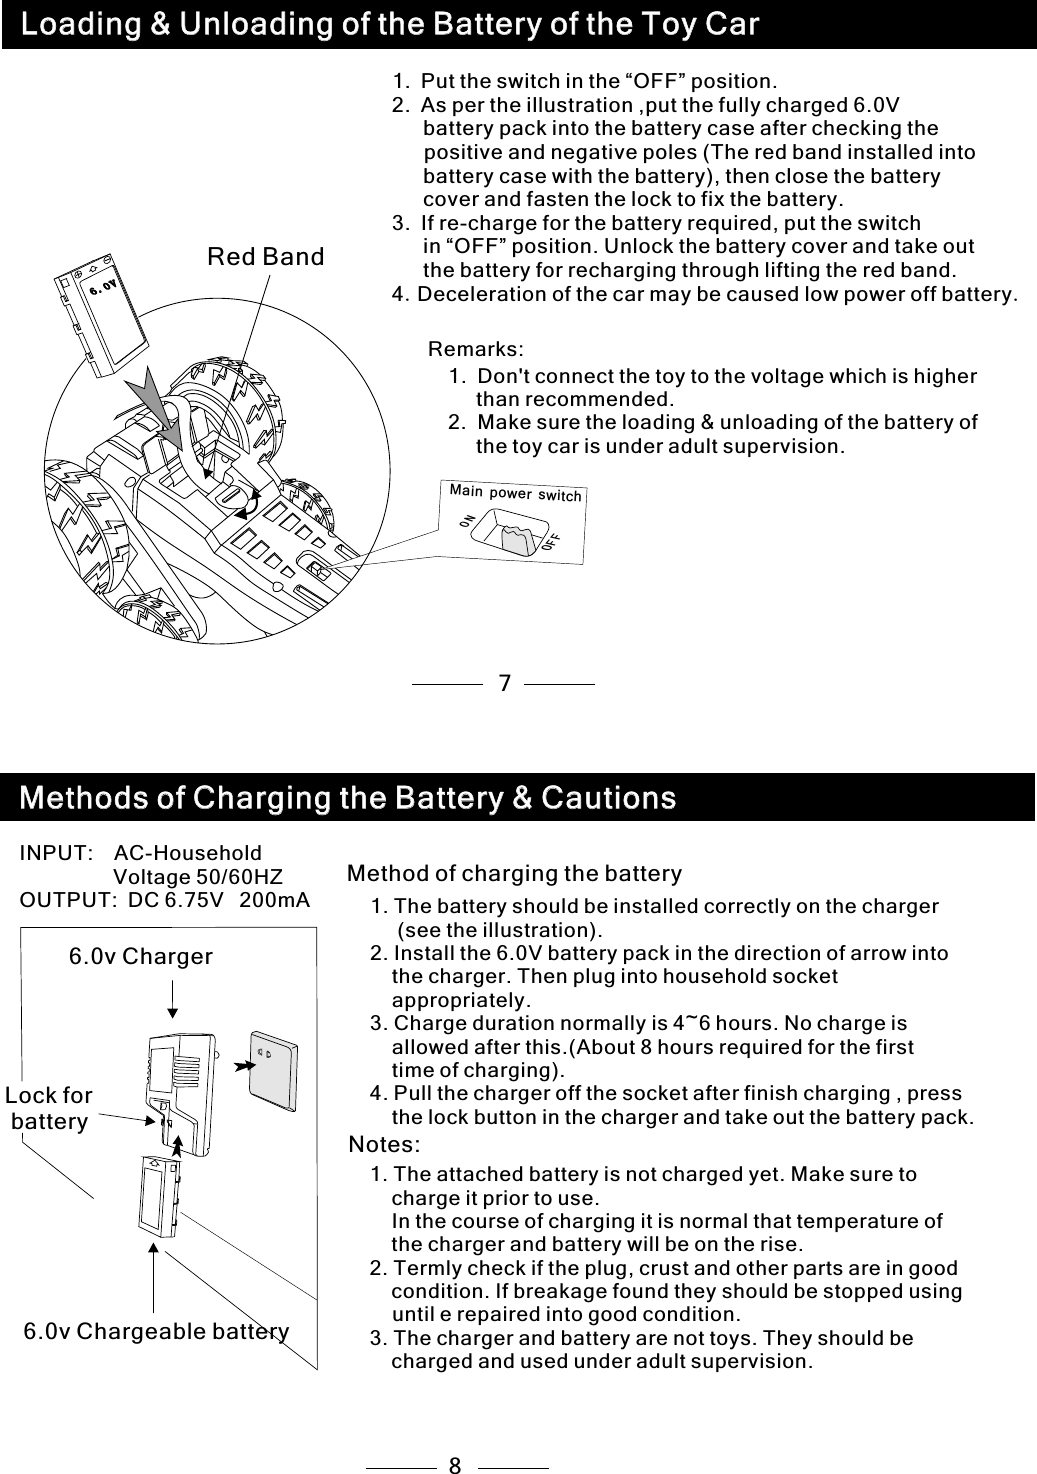 78Method of charging the battery1. The battery should be installed correctly on the charger      (see the illustration).2. Install the 6.0V battery pack in the direction of arrow into     the charger. Then plug into household socket    appropriately.3. Charge duration normally is 4~6 hours. No charge is     allowed after this.(About 8 hours required for the first     time of charging).4. Pull the charger off the socket after finish charging , press    the lock button in the charger and take out the battery pack. Notes:1. The attached battery is not charged yet. Make sure to     charge it prior to use.     In the course of charging it is normal that temperature of     the charger and battery will be on the rise.2. Termly check if the plug, crust and other parts are in good     condition. If breakage found they should be stopped using  until e repaired into good condition.3. The charger and battery are not toys. They should be    charged and used under adult supervision.1. Put the switch in the “OFF” position.2. As per the illustration ,put the fully charged 6.0V   battery pack into the battery case after checking the    positive and negative poles (The red band installed into    battery case with the battery), then close the battery    cover and fasten the lock to fix the battery.3. If re-charge for the battery required, put the switch   in “OFF” position. Unlock the battery cover and take out    the battery for recharging through lifting the red band.4.Deceleration of the car may be caused low power off battery.1.  Don&apos;t connect the toy to the voltage which is higher   than recommended.2.  Make sure the loading &amp; unloading of the battery of  the toy car is under adult supervision.Remarks: ONF FOM n pow  w caier s it h Red Band 6.0v ChargerLock for battery6.0v Chargeable batteryINPUT:  AC-Household          Voltage 50/60HZOUTPUT: DC 6.75V  200mALoading &amp; Unloading of the Battery of the Toy CarLoading &amp; Unloading of the Battery of the Toy Car06 . V06 . VMethods of Charging the Battery &amp; CautionsMethods of Charging the Battery &amp; Cautions